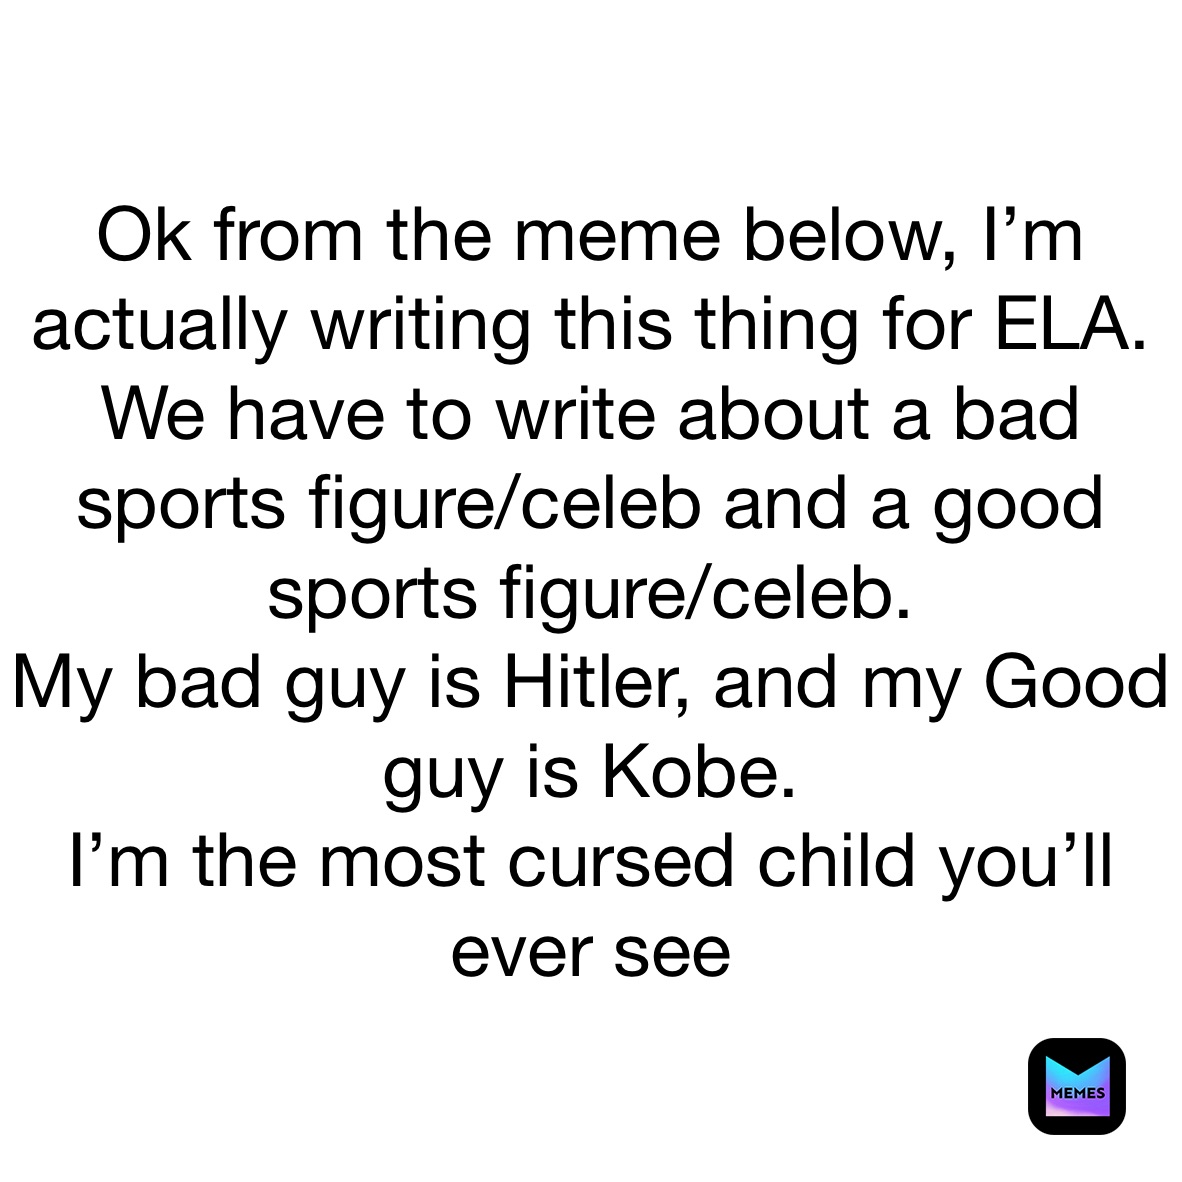 Ok from the meme below, I’m actually writing this thing for ELA.
We have to write about a bad sports figure/celeb and a good sports figure/celeb.
My bad guy is Hitler, and my Good guy is Kobe.
I’m the most cursed child you’ll ever see